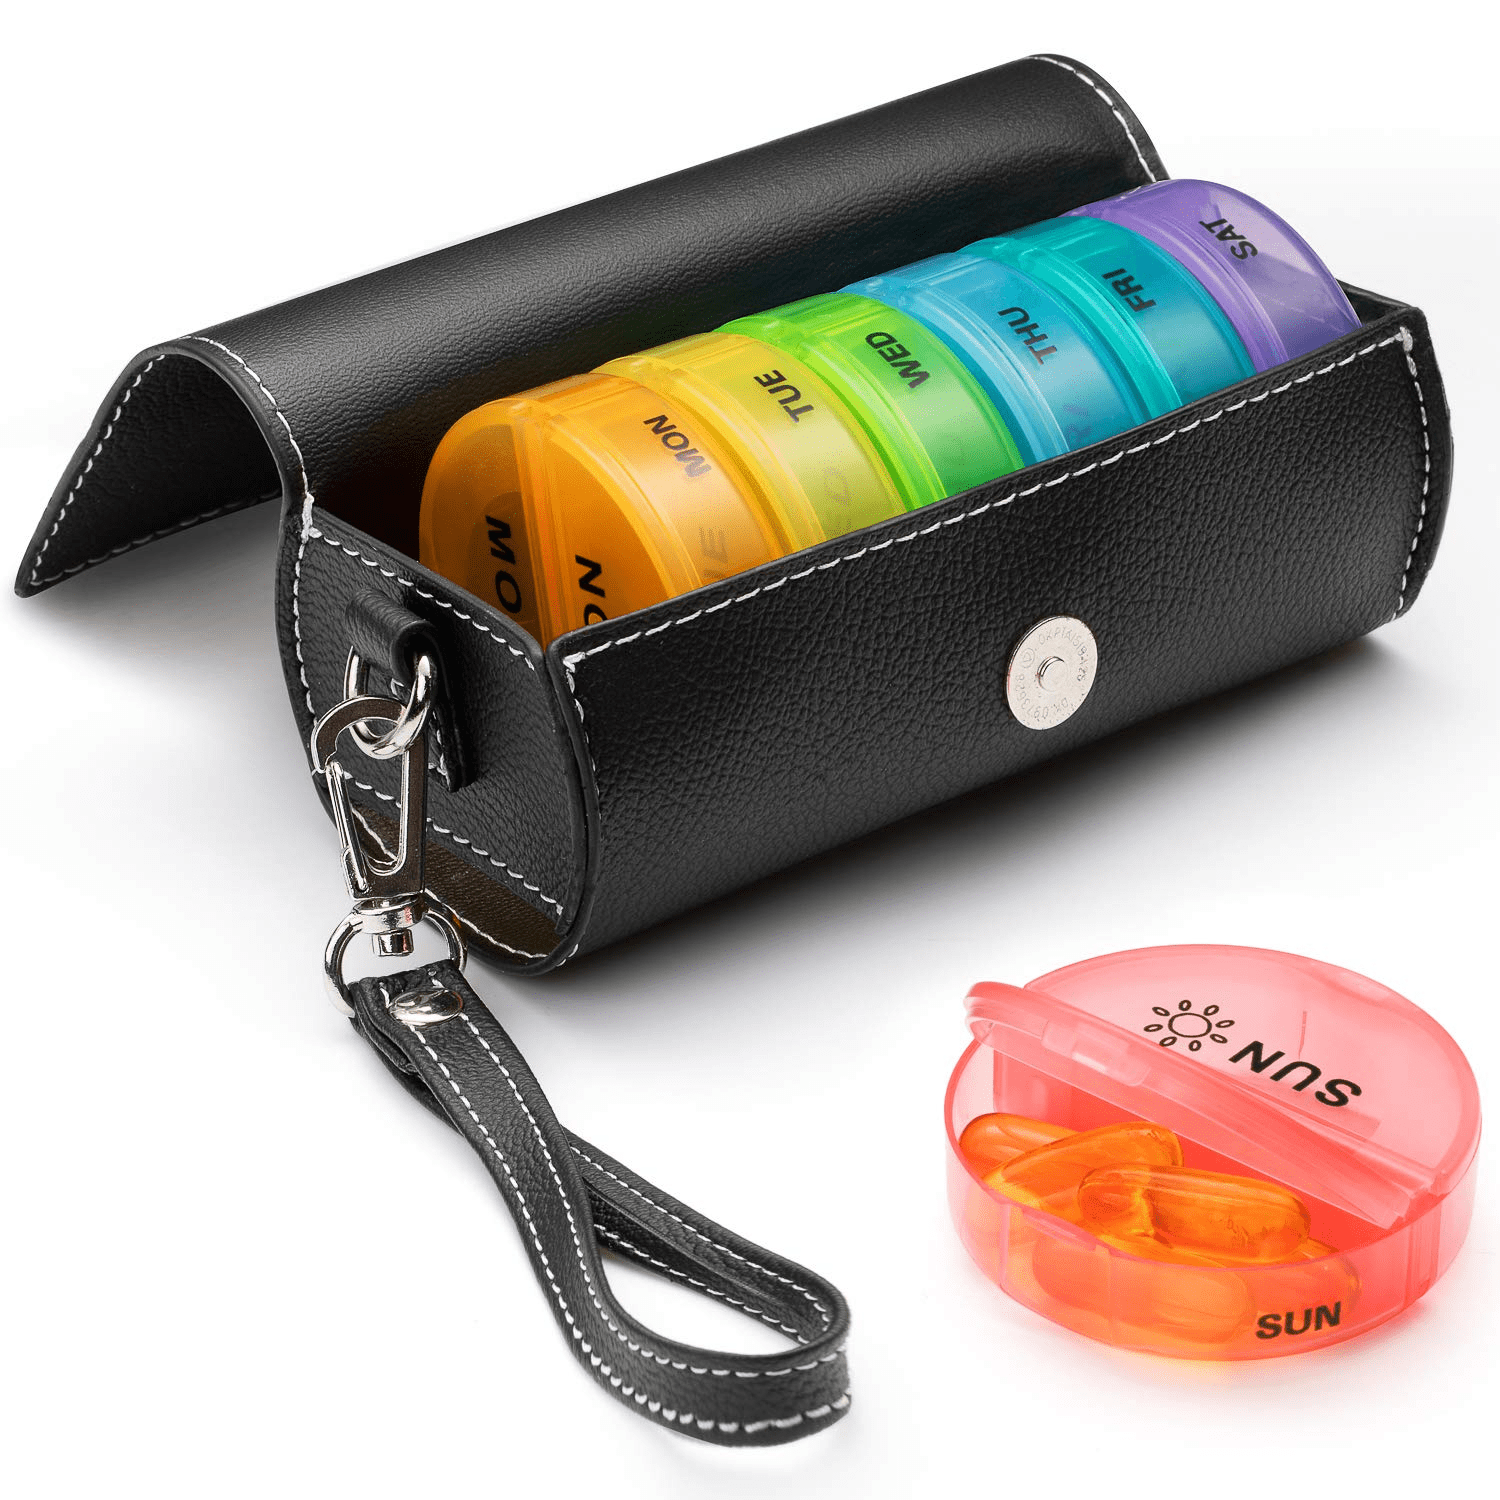 7 Days AM PM Pill Organizer - 2 Times a Day Large Weekly Pills Case,  BPA-Free Pills Box Container Cases, Morning and Night Pill Boxes with  Unique Push-Button Pop Open Design Hold